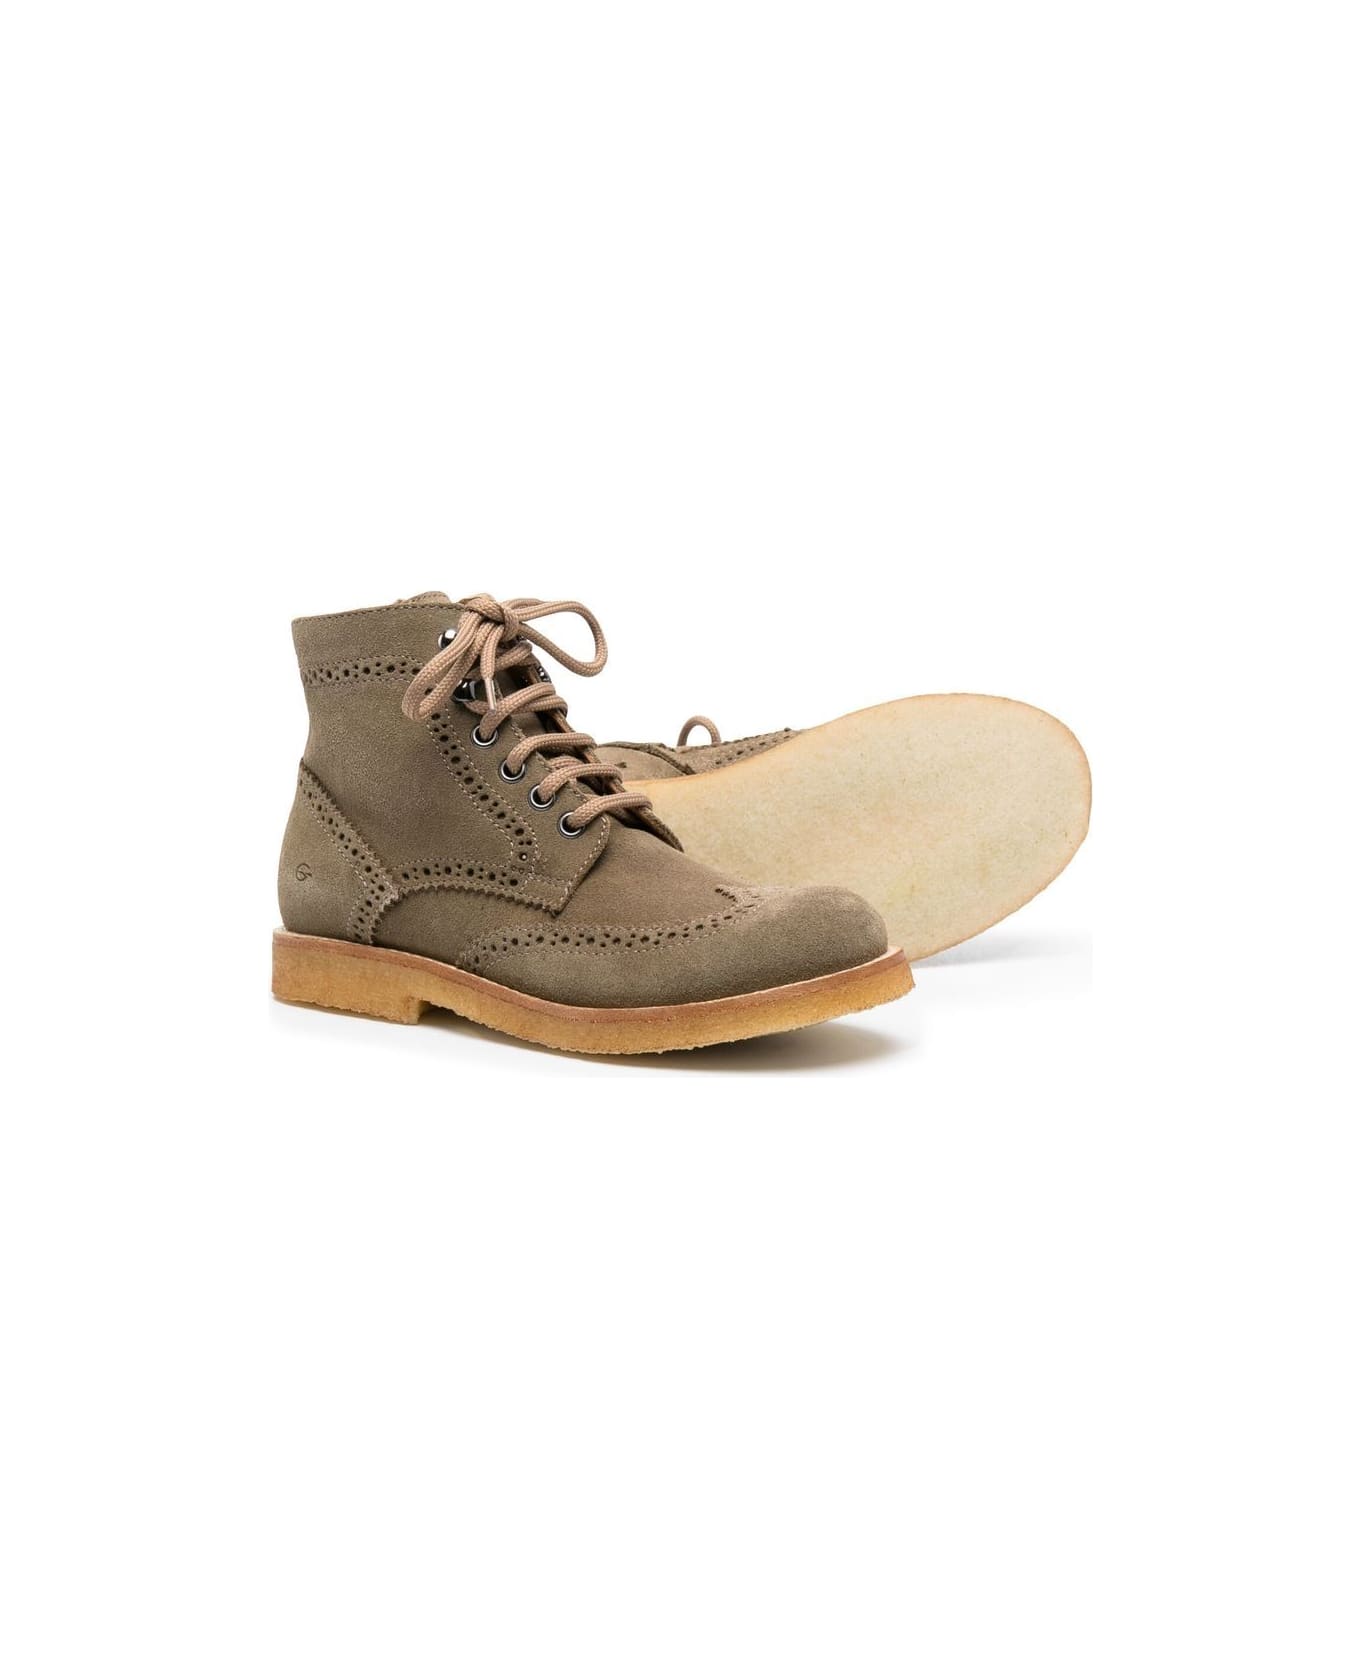 Gallucci Lace-up Suede Brogue Boots - Beige シューズ